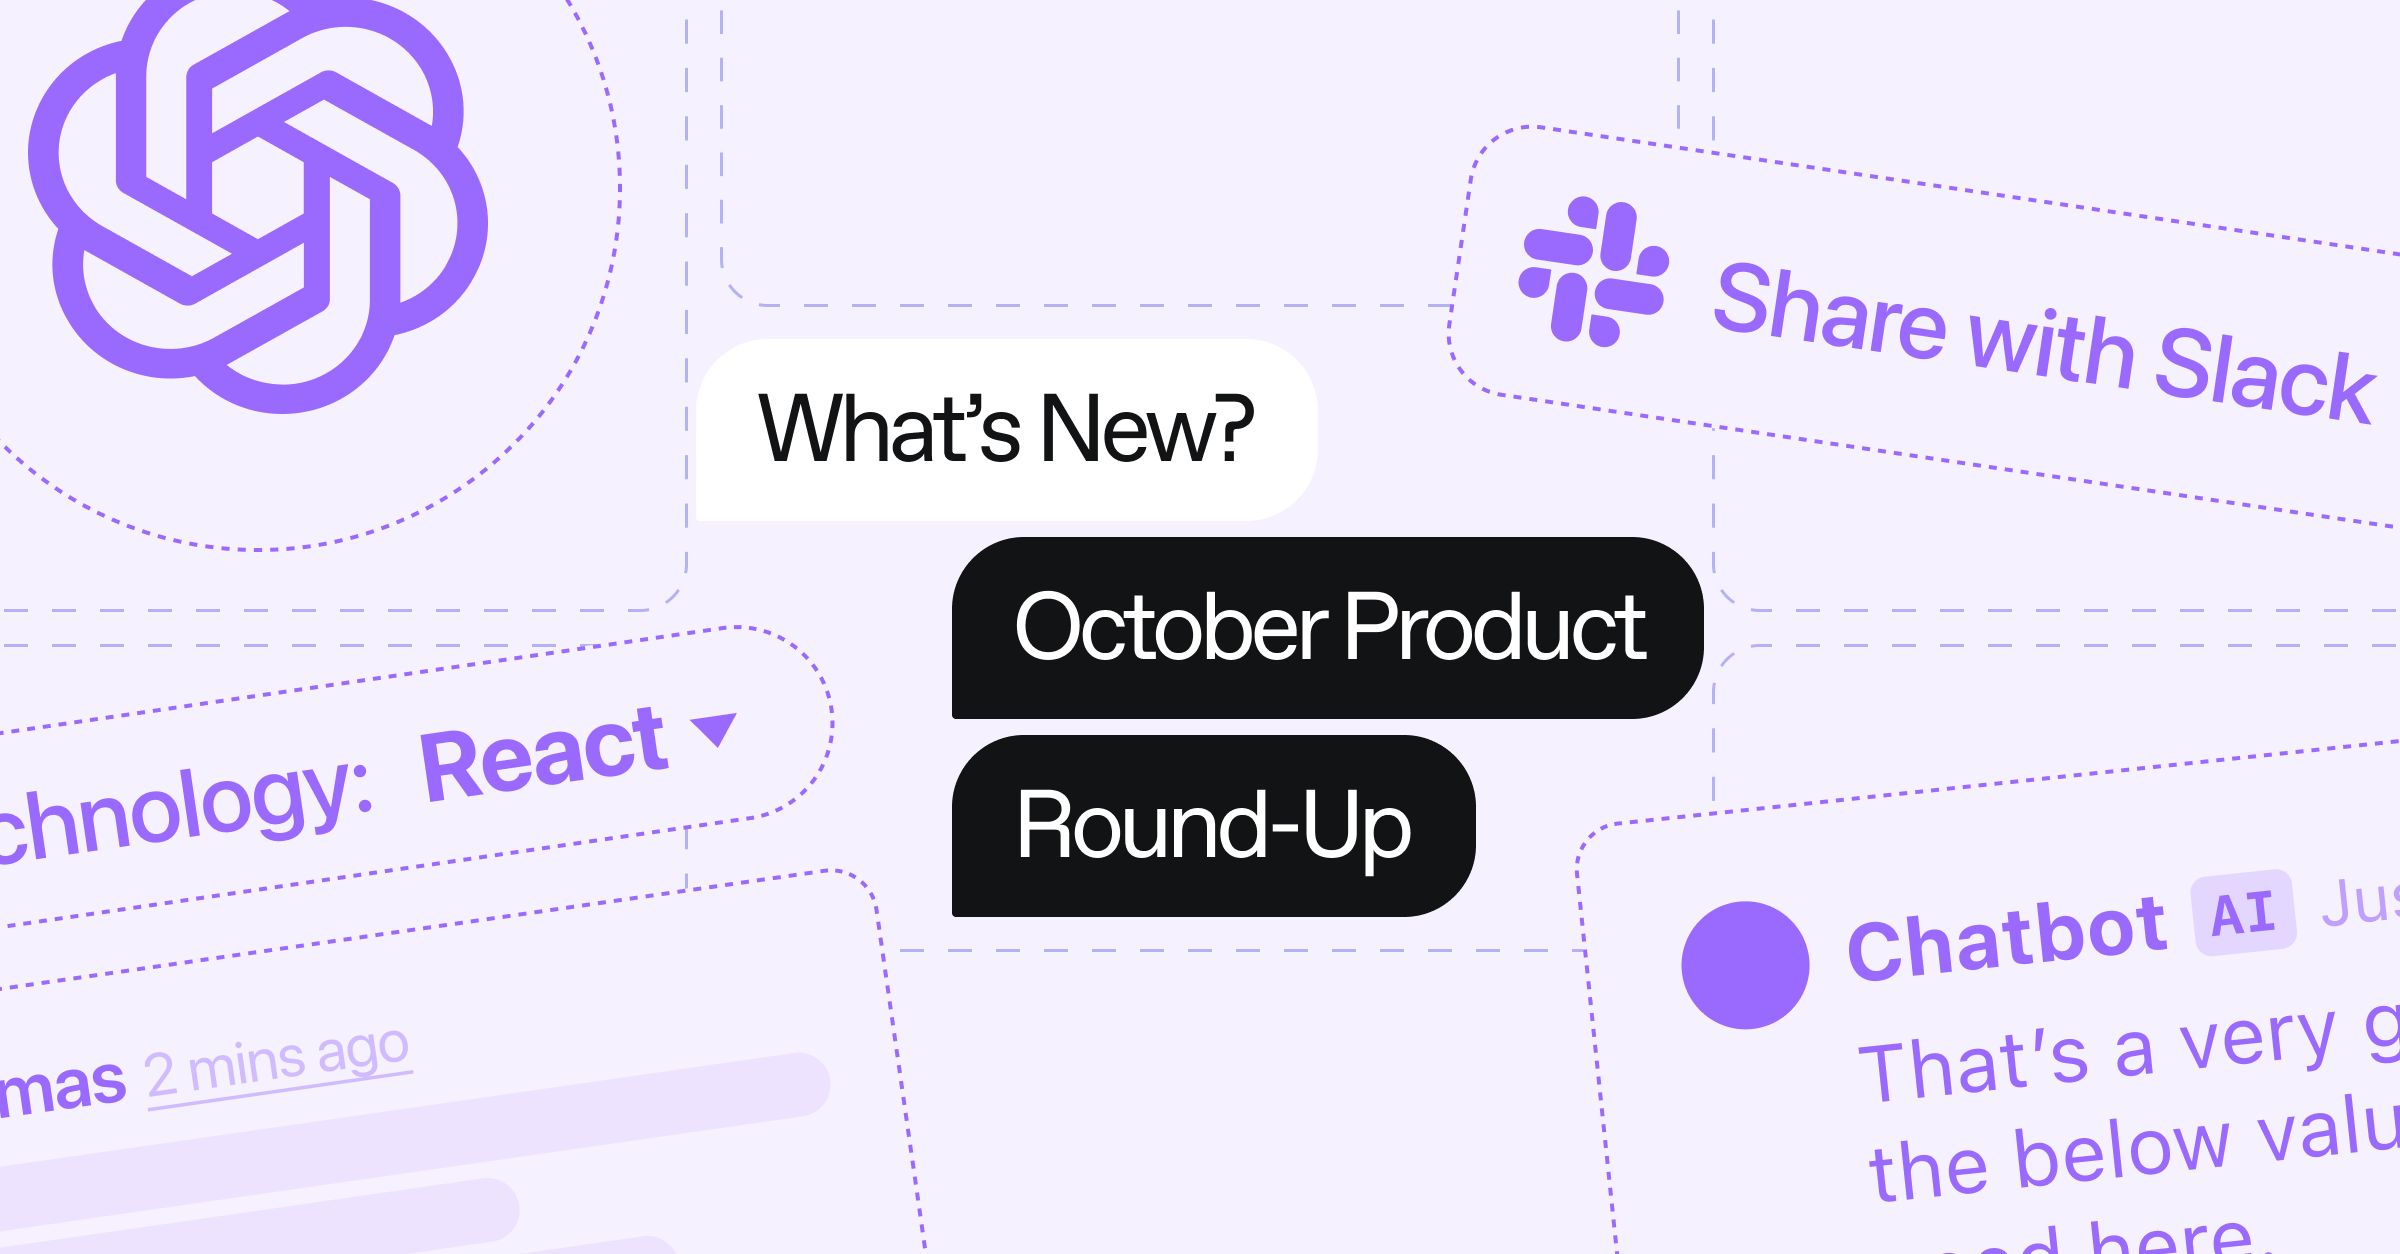 A graphic showing chat messages with reactions and the text "What's New? October Product Round-Up"